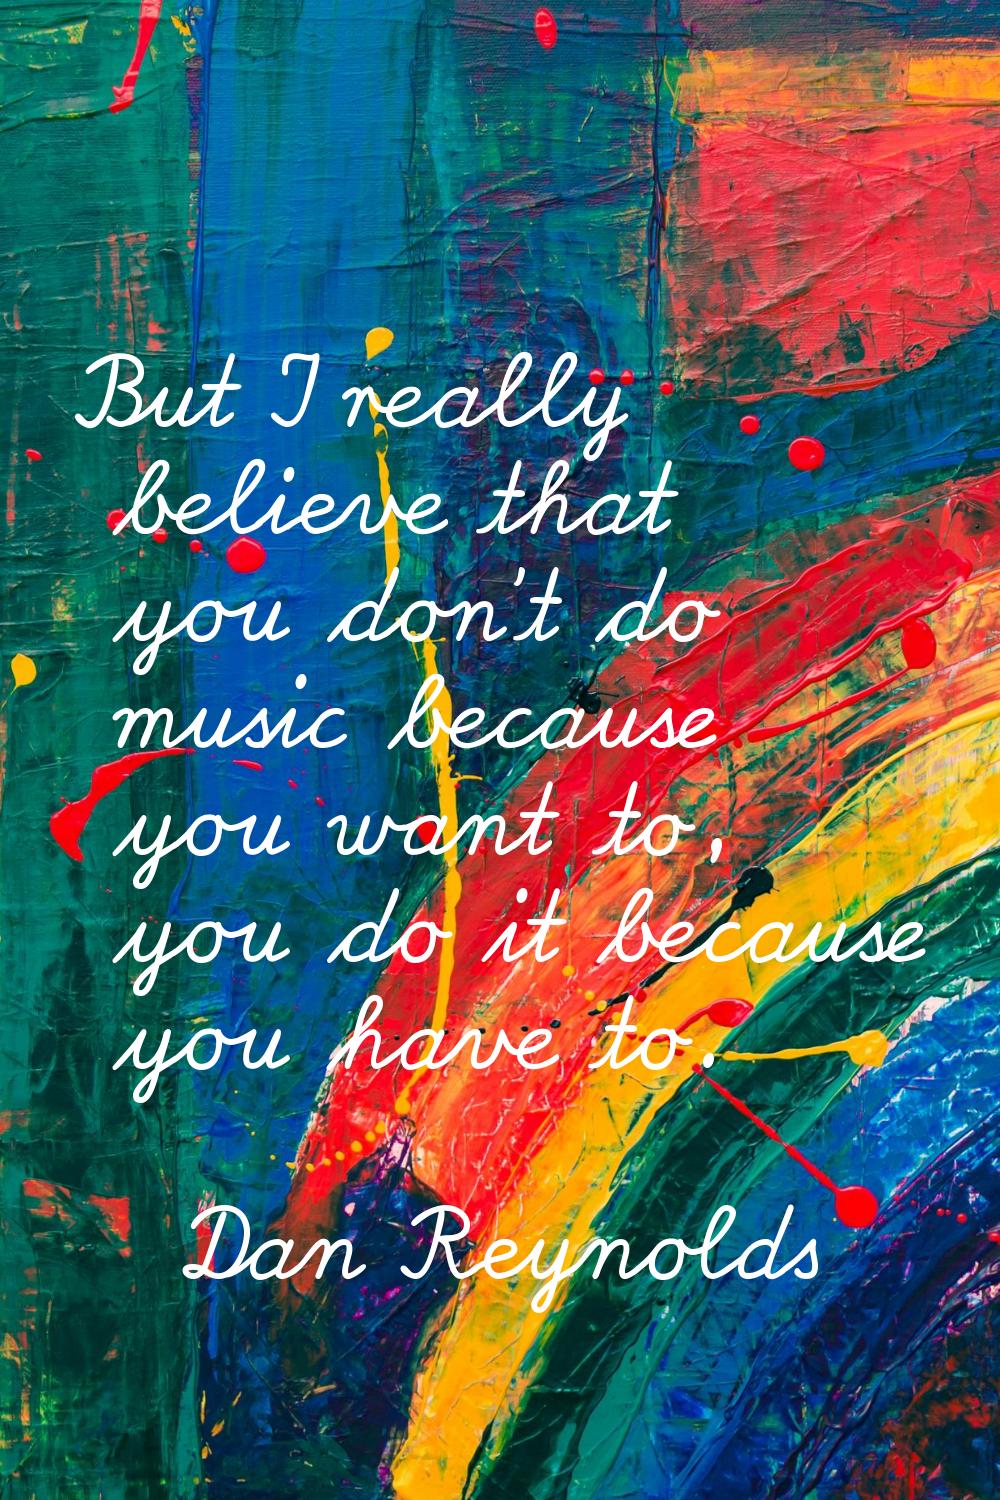 But I really believe that you don't do music because you want to, you do it because you have to.